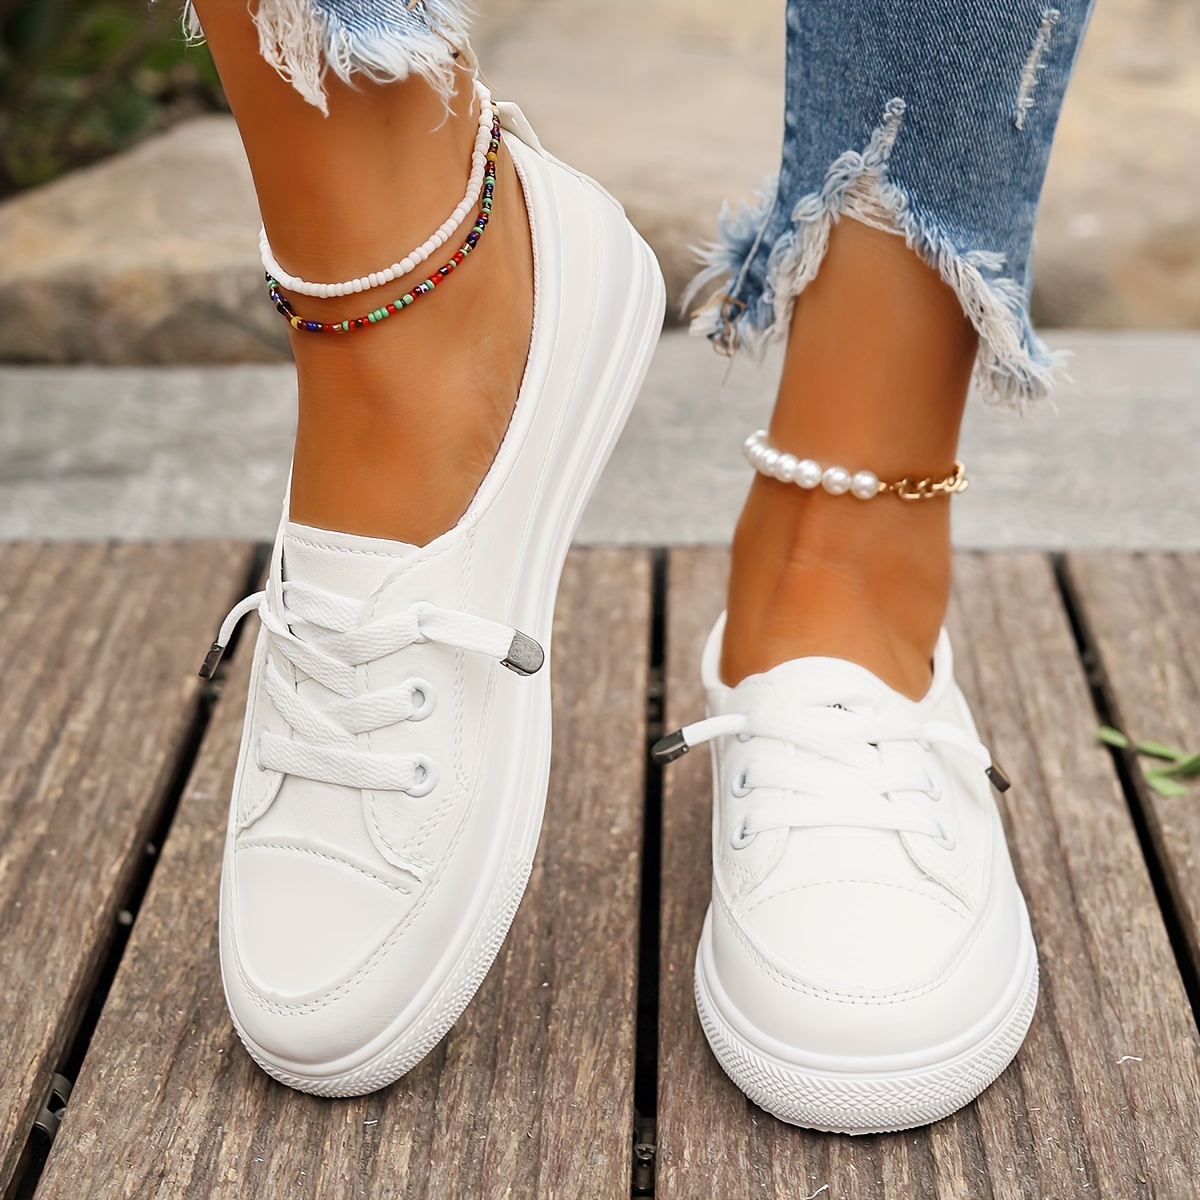 white skate shoes women s casual low top slip flat shoes details 1